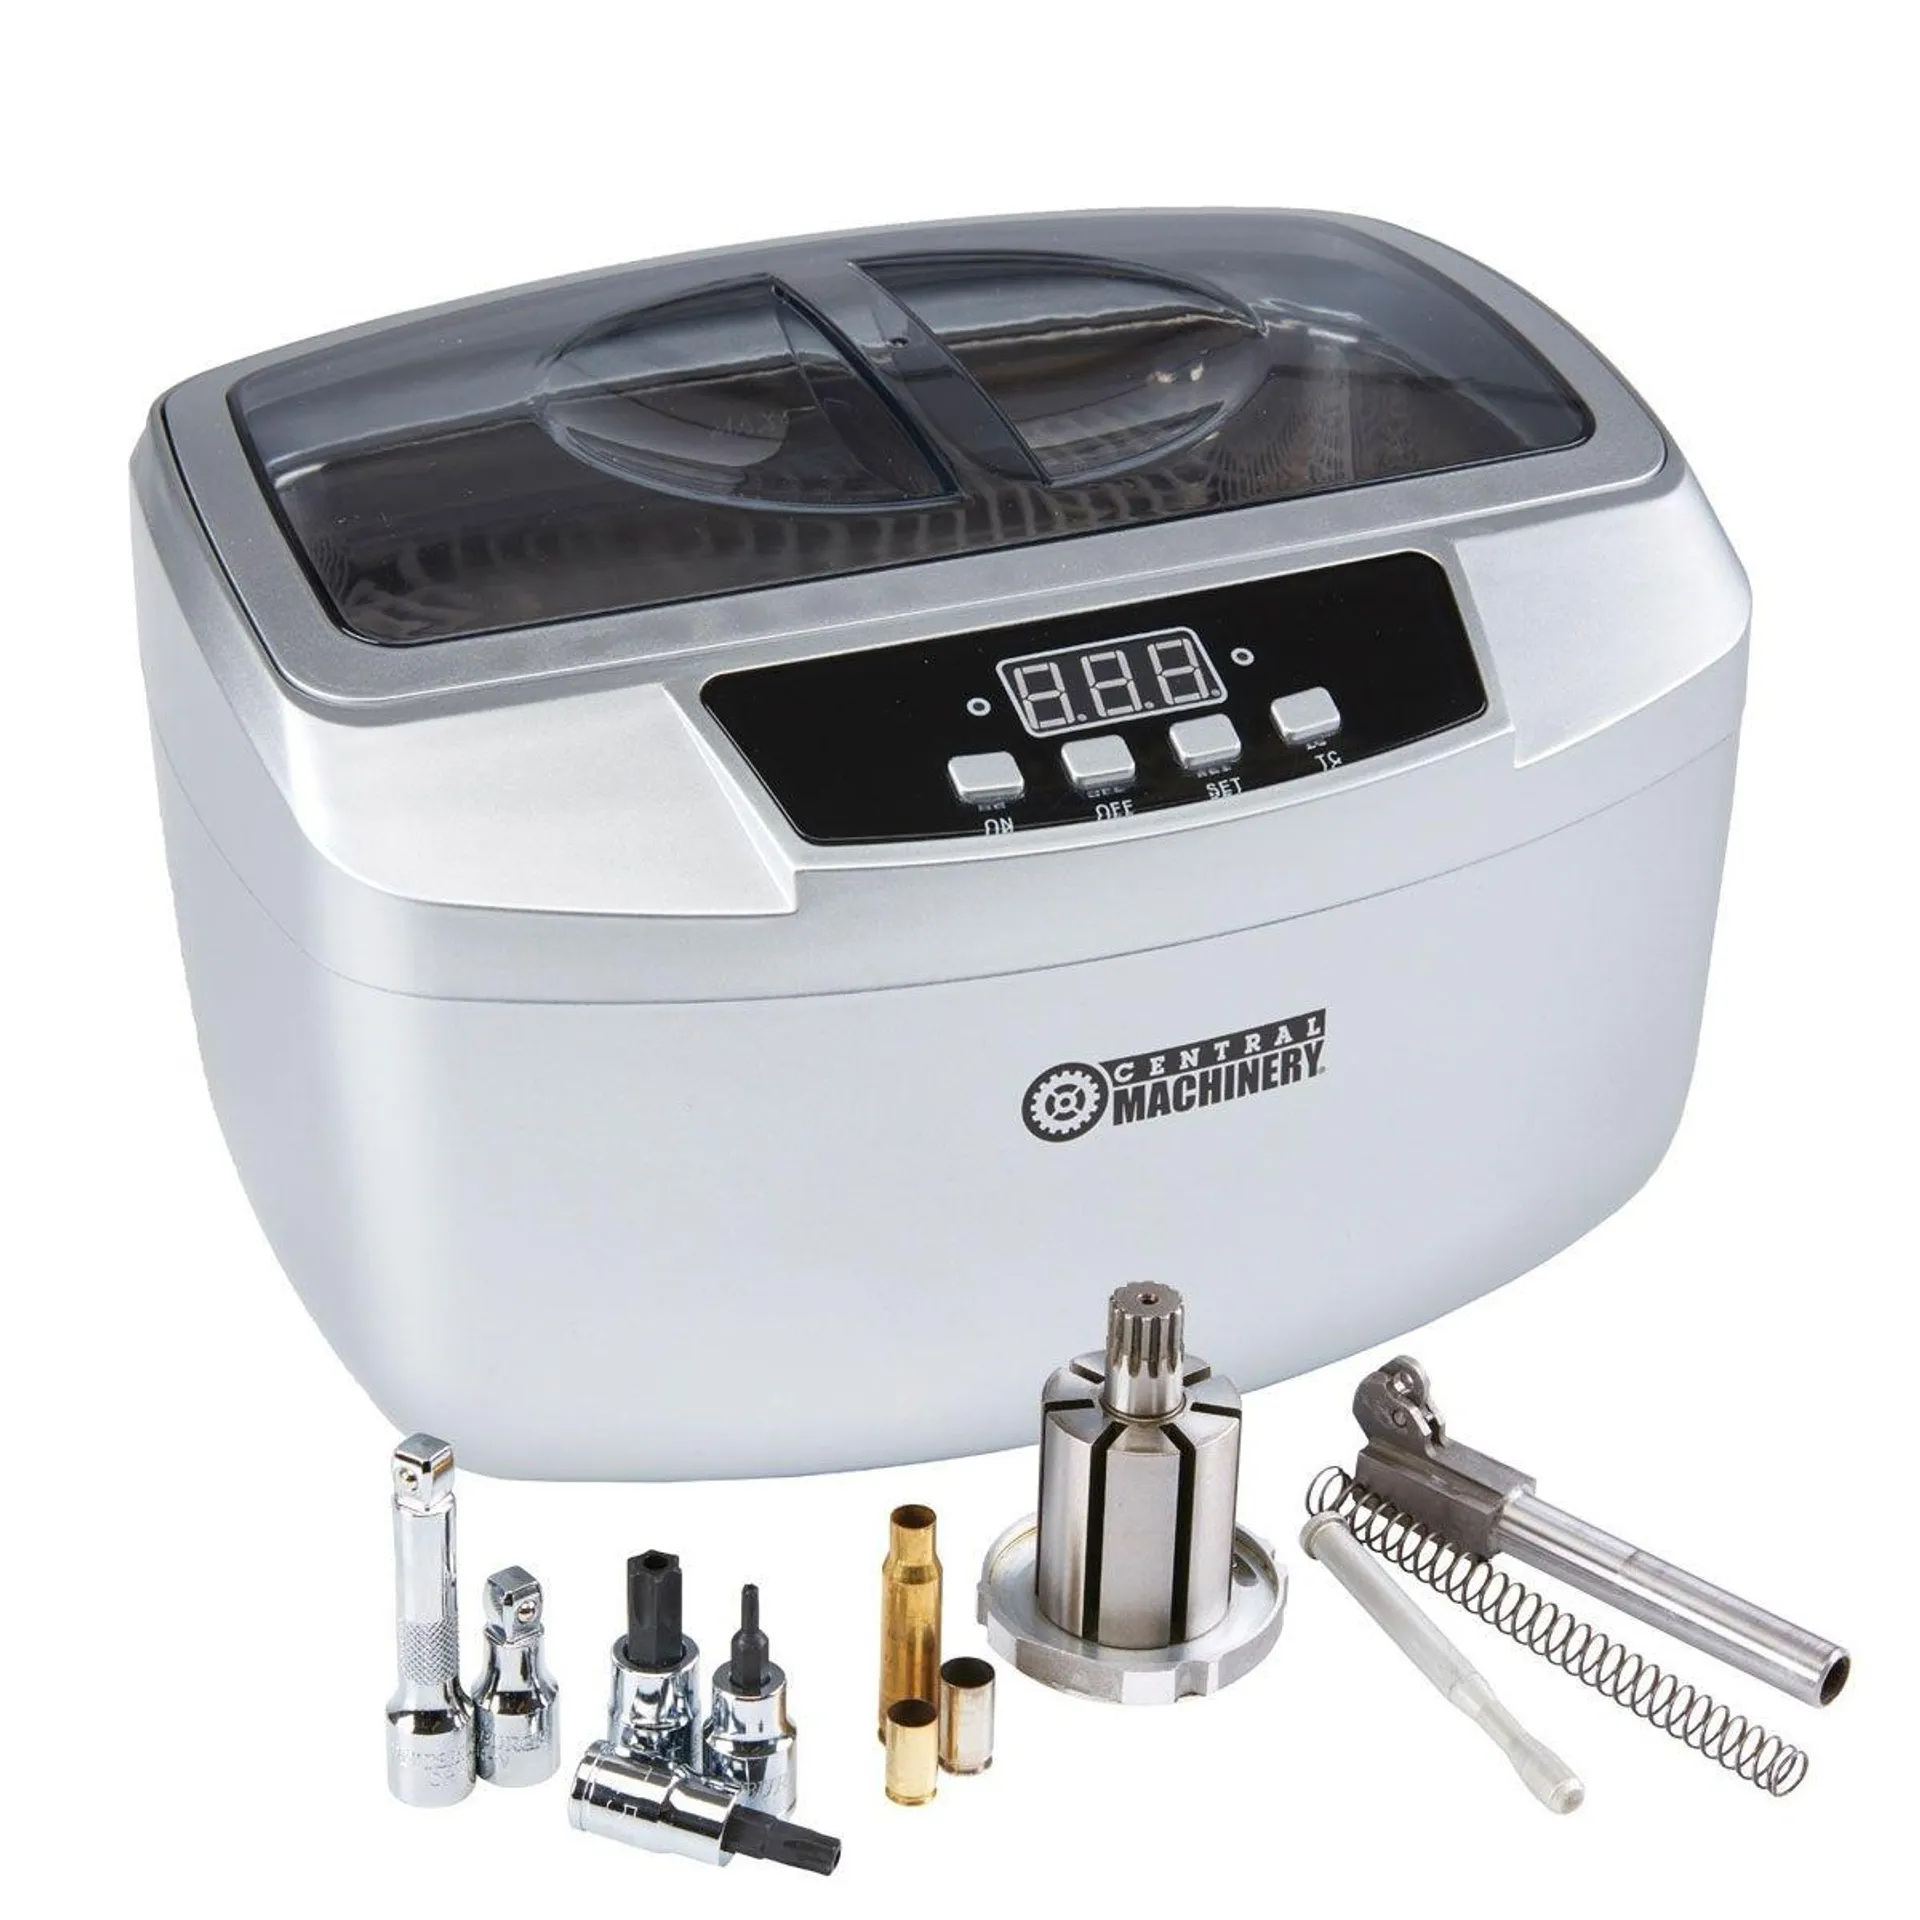 CENTRAL MACHINERY 2.5 Liter Ultrasonic Cleaner